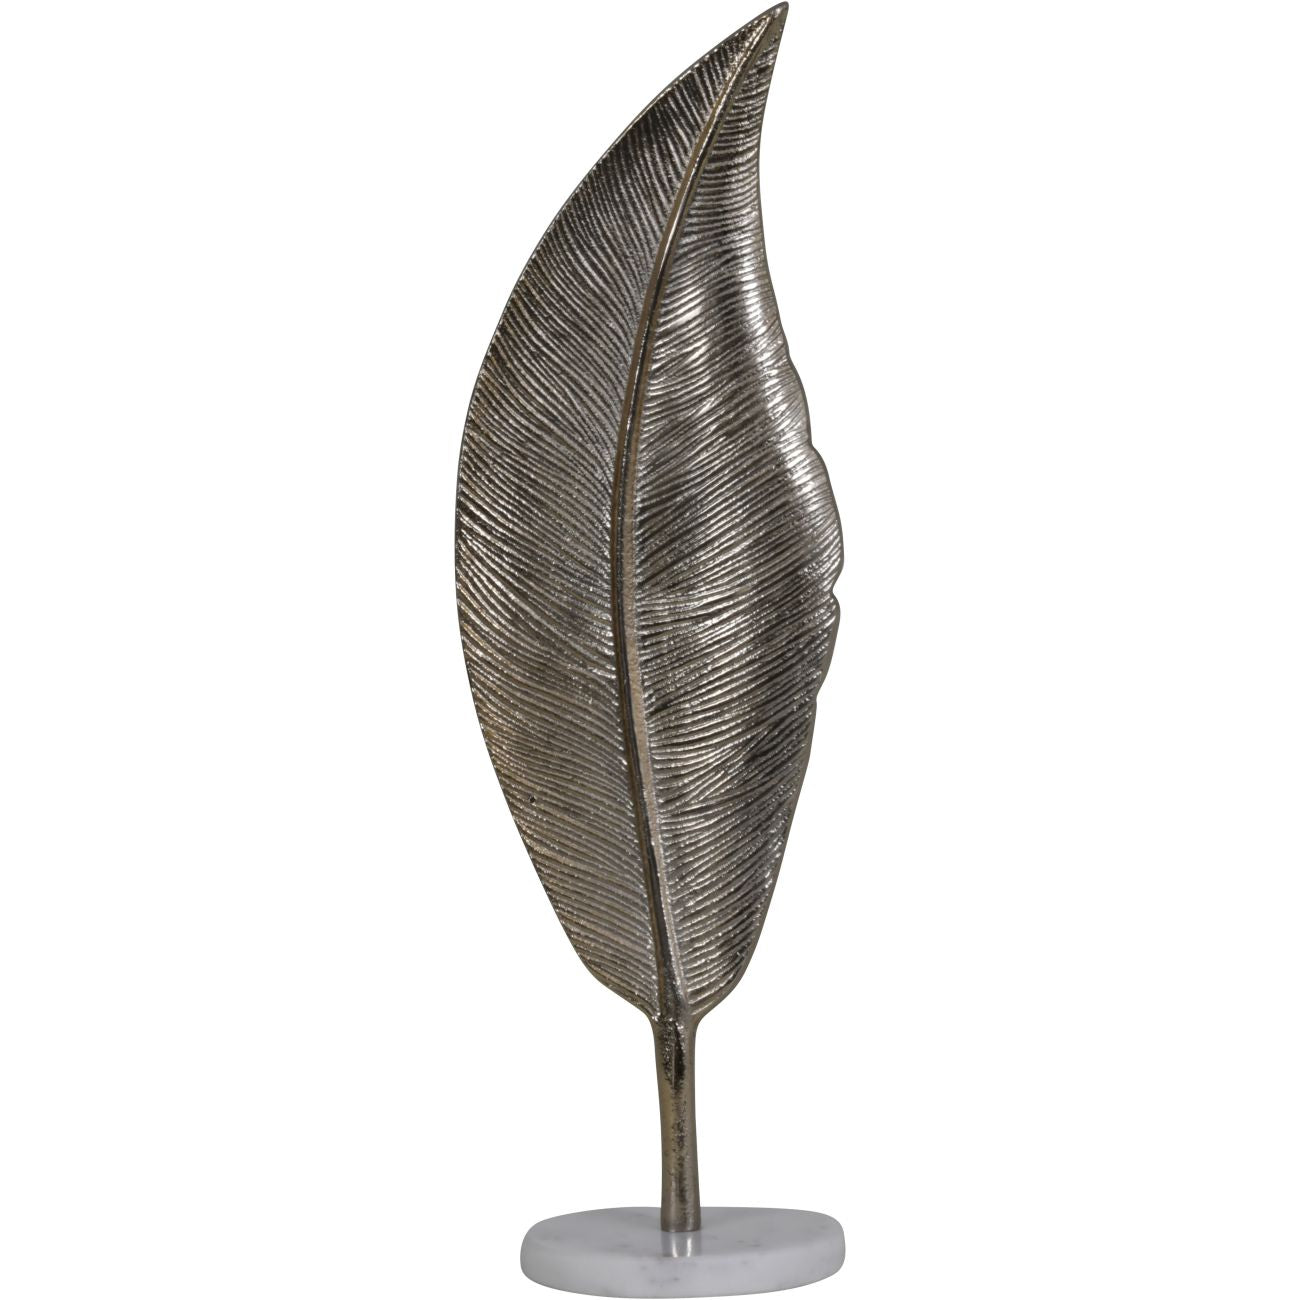 Savoy Champagne Gold Aluminium Feather Sculpture on White Marble Base